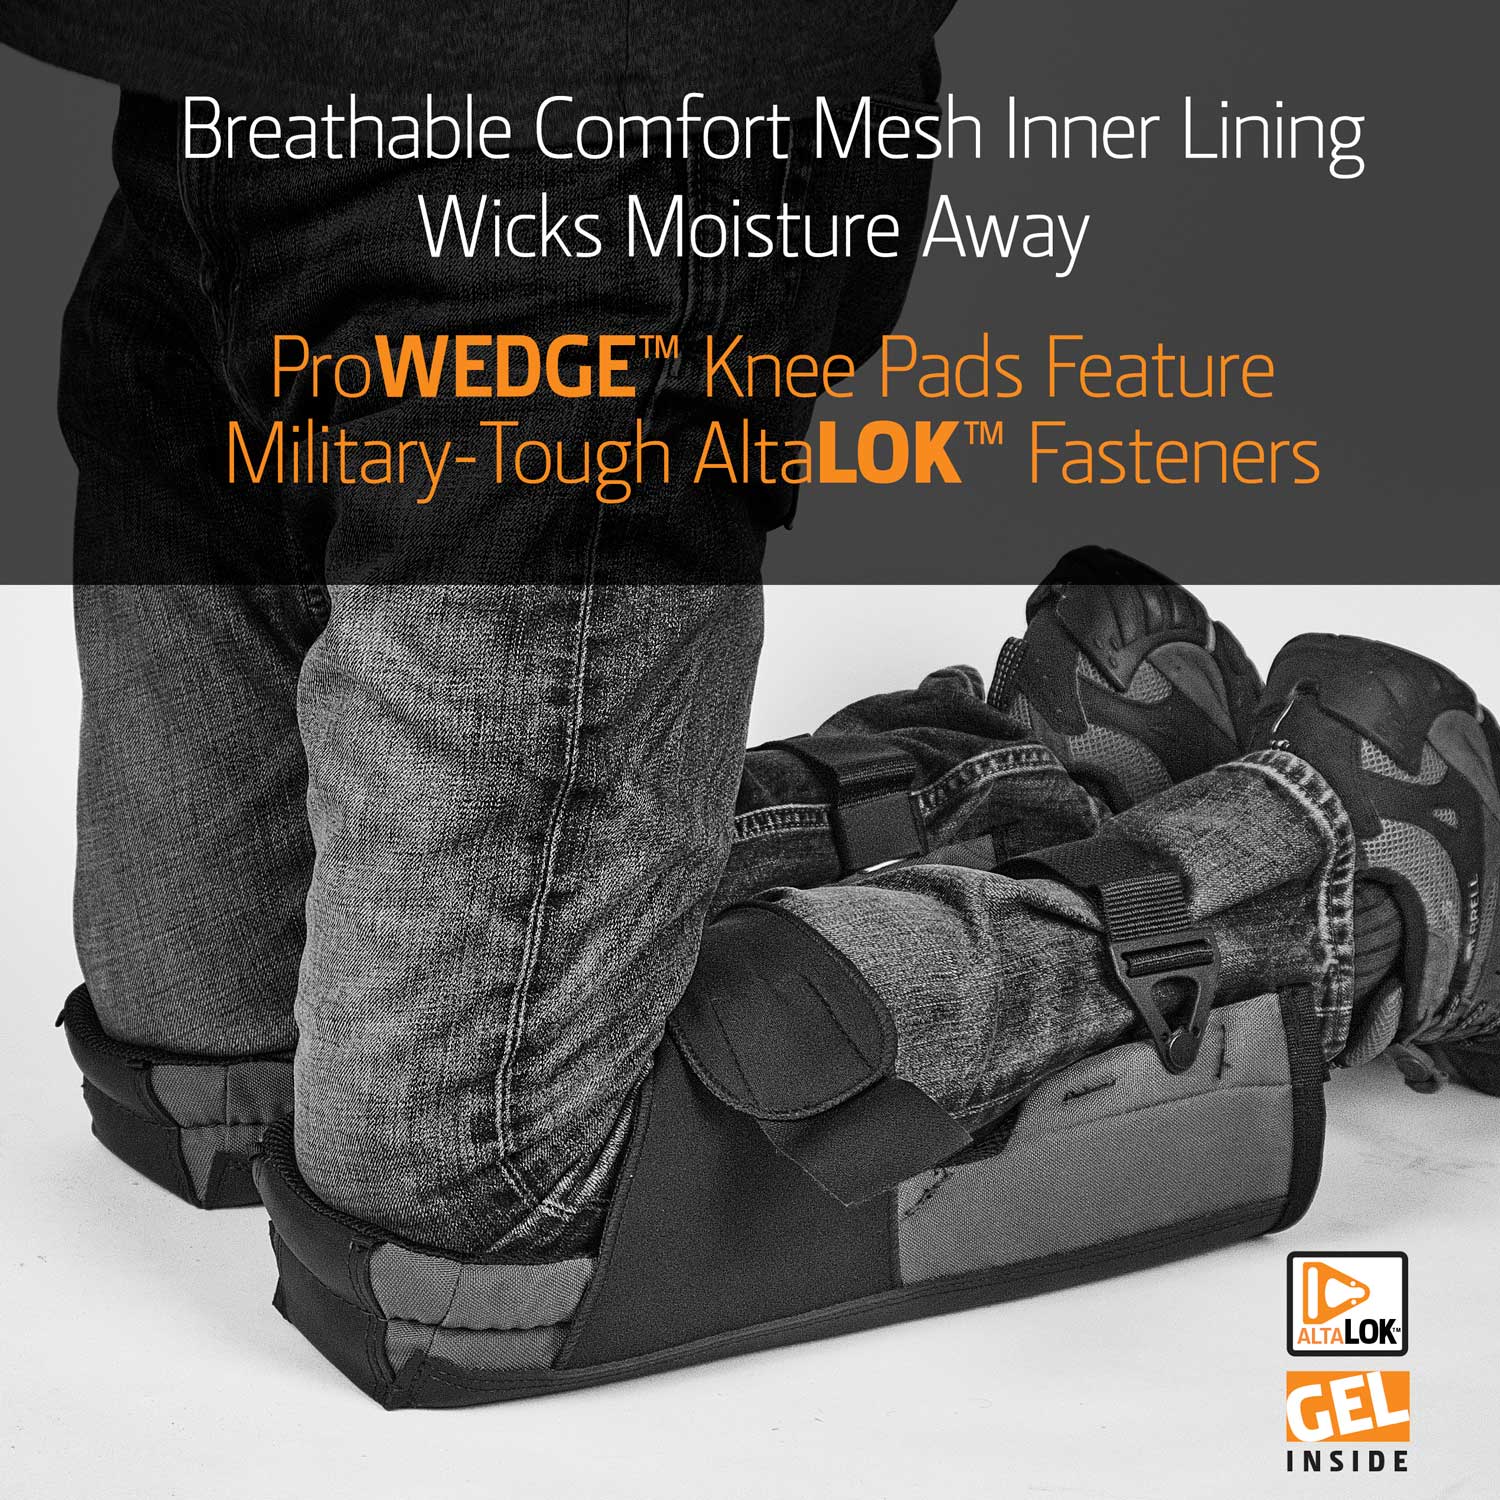 ALTA Durable kneeling Knee Pad with wedge shape for all-day comfort. Great for flooring jobs